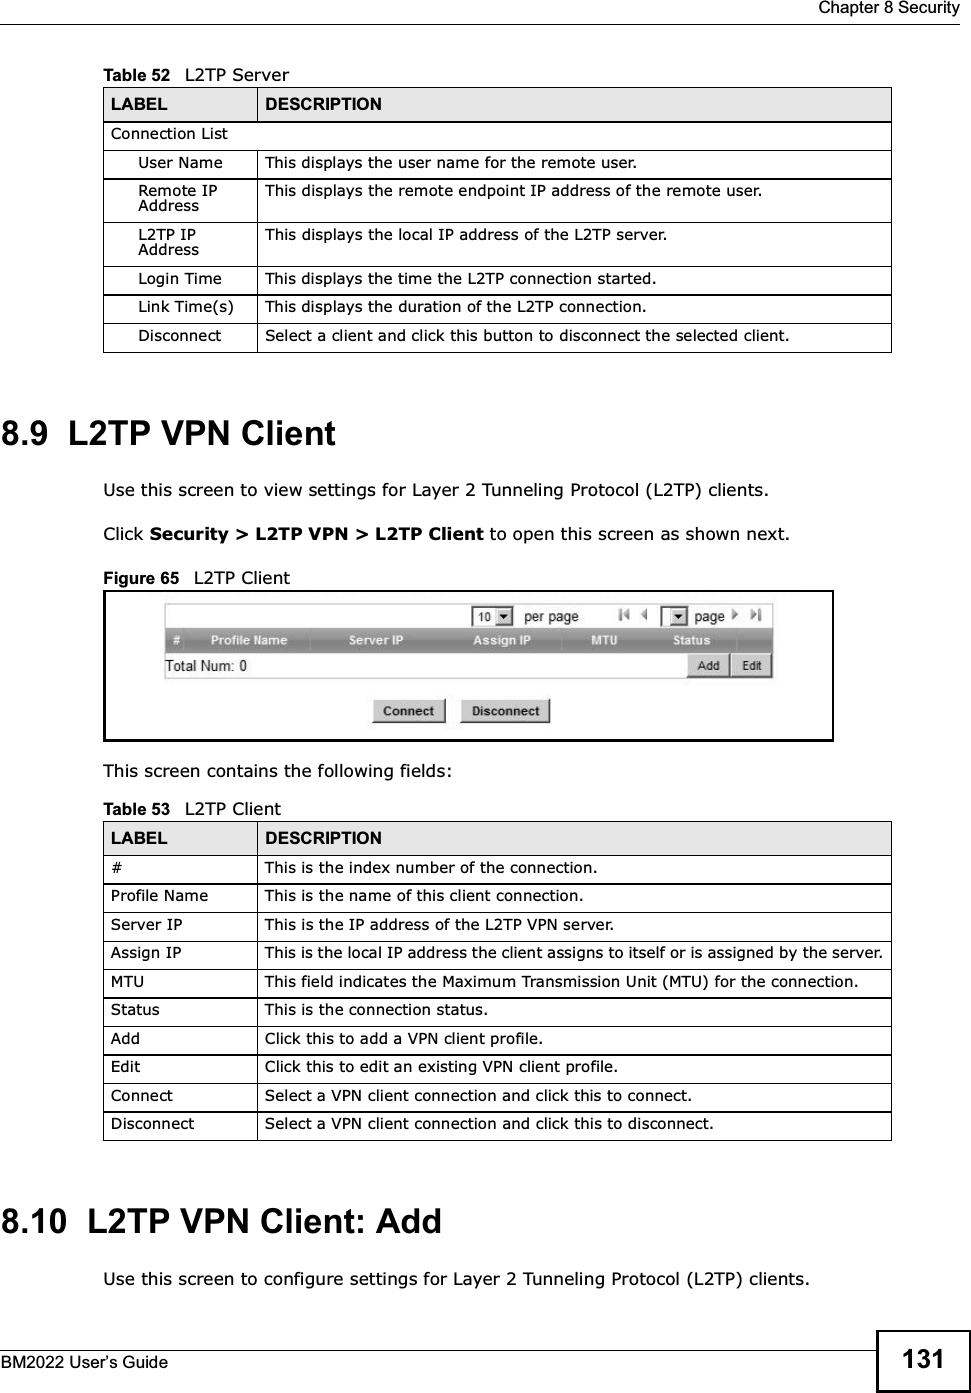  Chapter 8 SecurityBM2022 Users Guide 1318.9  L2TP VPN ClientUse this screen to view settings for Layer 2 Tunneling Protocol (L2TP) clients.Click Security &gt; L2TP VPN &gt; L2TP Client to open this screen as shown next.Figure 65   L2TP ClientThis screen contains the following fields:8.10  L2TP VPN Client: AddUse this screen to configure settings for Layer 2 Tunneling Protocol (L2TP) clients.Connection ListUser Name This displays the user name for the remote user.Remote IP AddressThis displays the remote endpoint IP address of the remote user.L2TP IP AddressThis displays the local IP address of the L2TP server.Login Time This displays the time the L2TP connection started.Link Time(s) This displays the duration of the L2TP connection.Disconnect Select a client and click this button to disconnect the selected client.Table 52   L2TP ServerLABEL DESCRIPTIONTable 53   L2TP ClientLABEL DESCRIPTION# This is the index number of the connection.Profile Name This is the name of this client connection.Server IP This is the IP address of the L2TP VPN server.Assign IP This is the local IP address the client assigns to itself or is assigned by the server.MTU This field indicates the Maximum Transmission Unit (MTU) for the connection.Status This is the connection status.Add Click this to add a VPN client profile.Edit Click this to edit an existing VPN client profile.Connect Select a VPN client connection and click this to connect.Disconnect Select a VPN client connection and click this to disconnect.